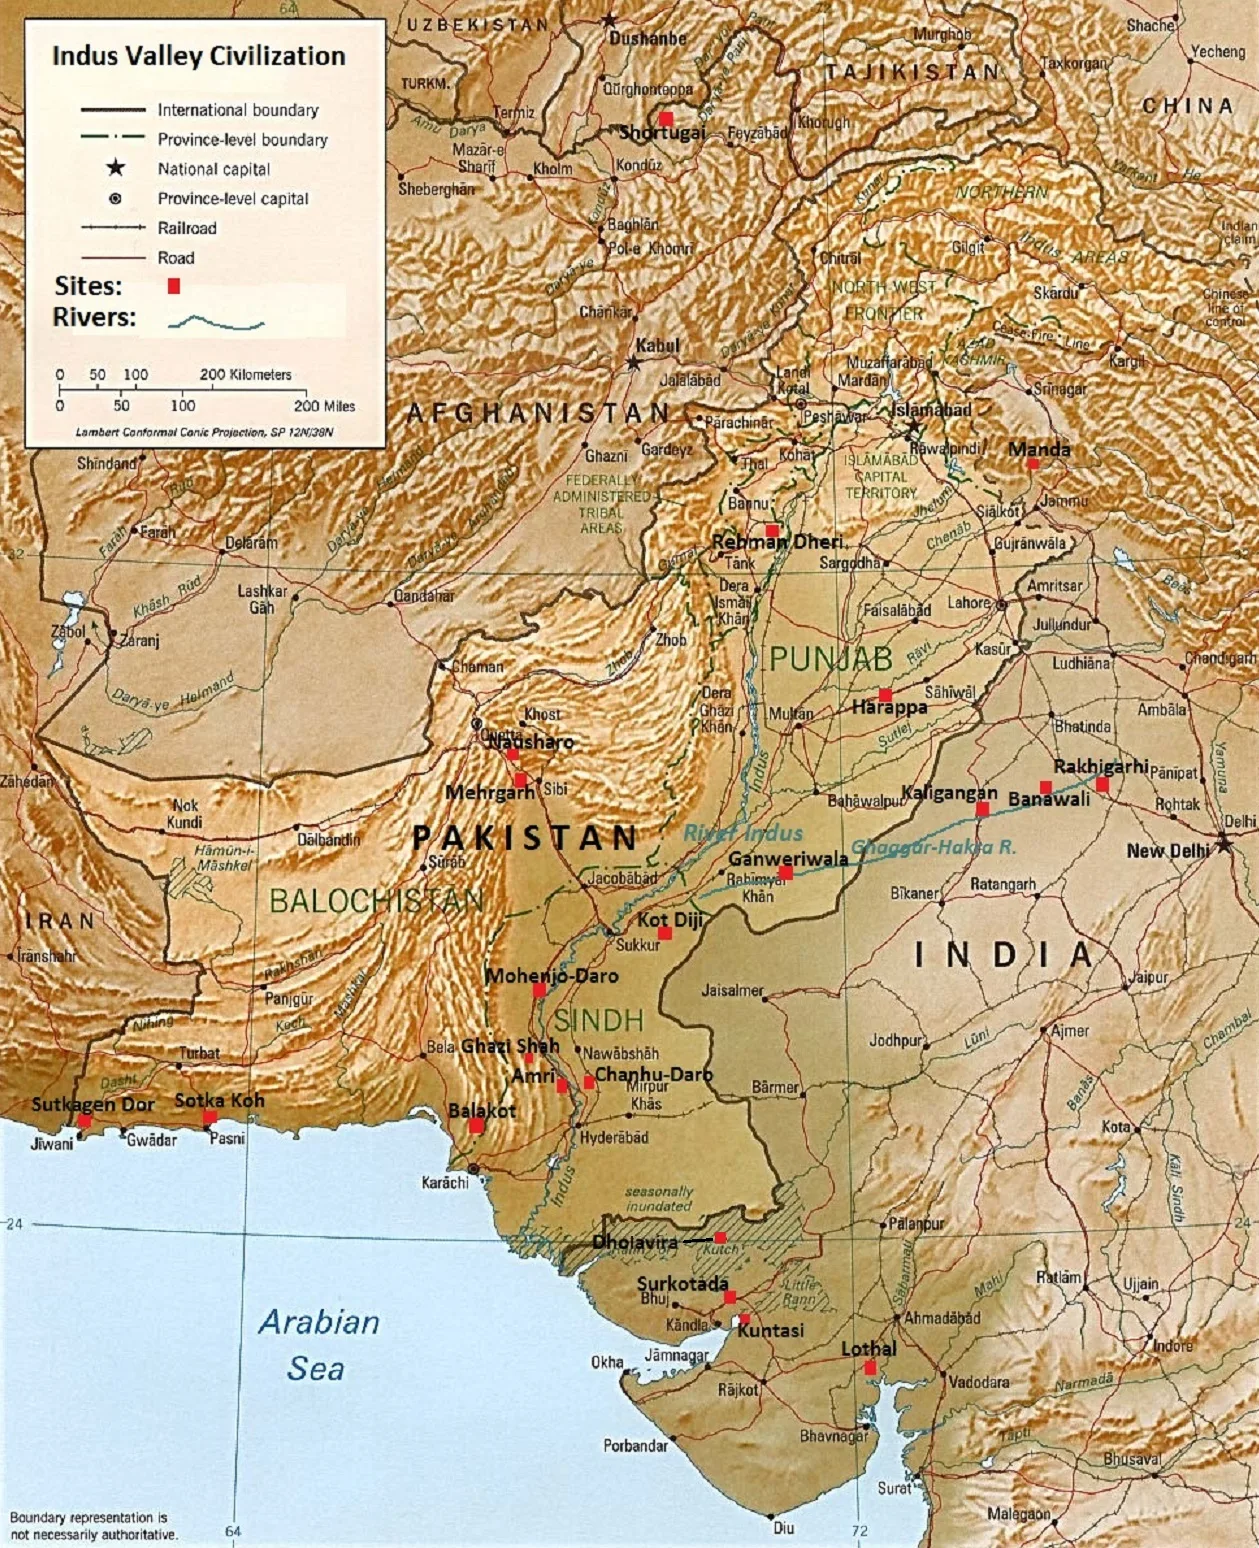 Major sites and extent of the Indus Valley Civilization | Image: Intelligence Agency